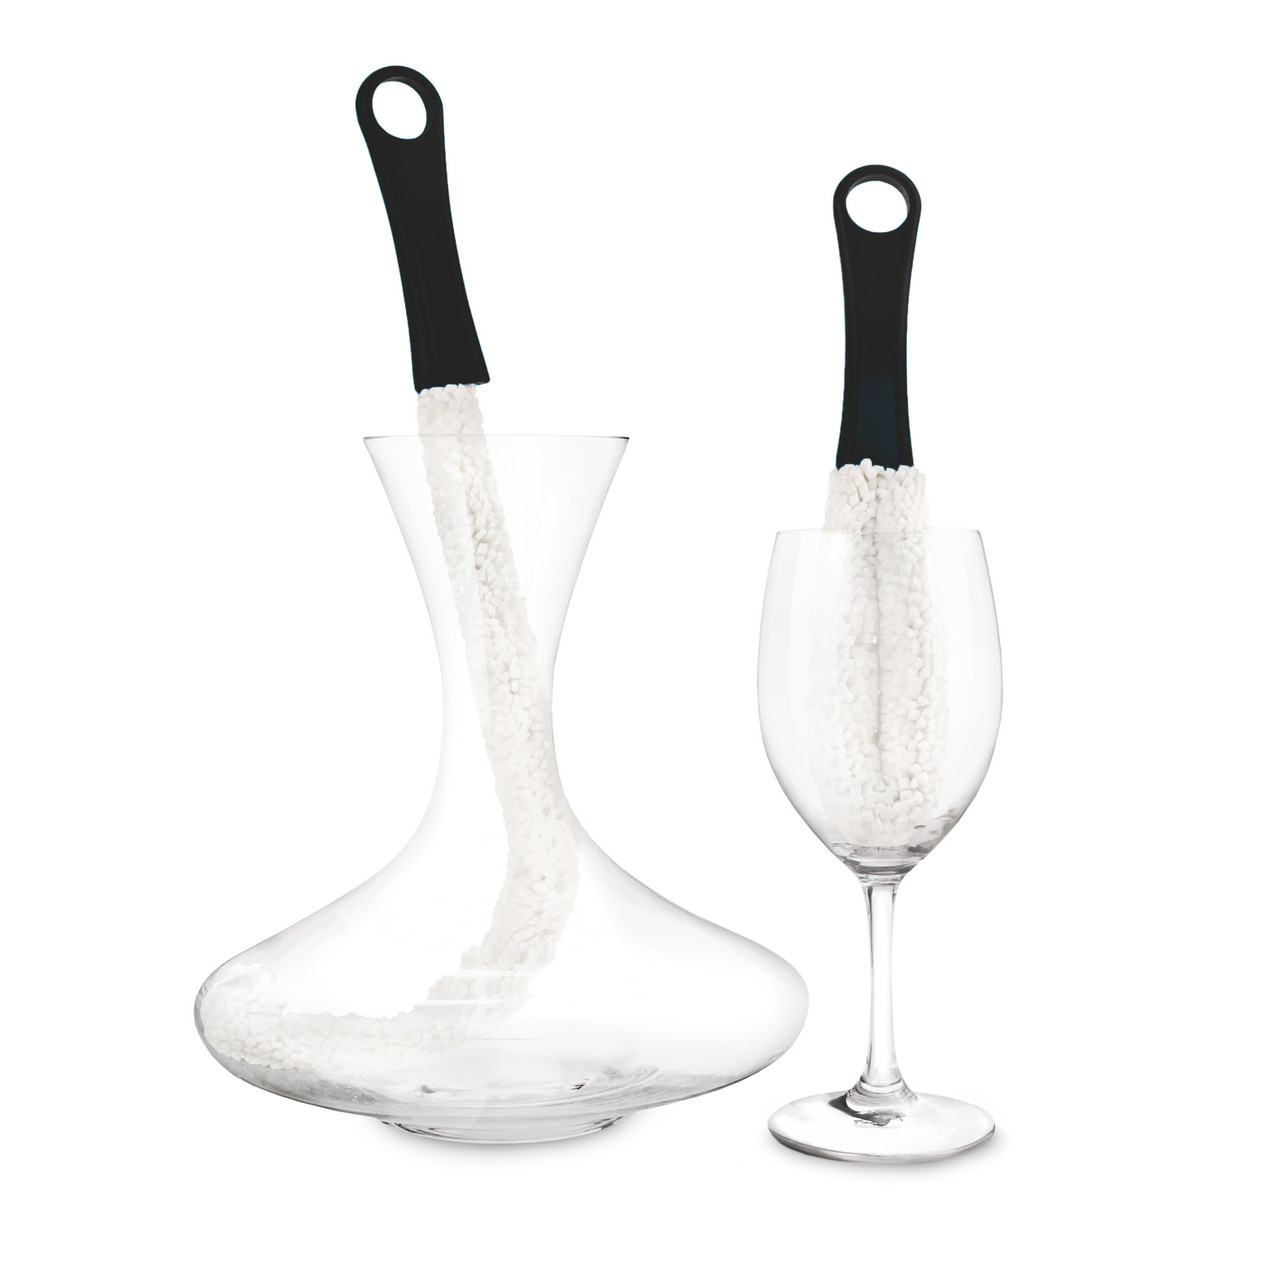 Cleanse: Reusable Glassware Brushes